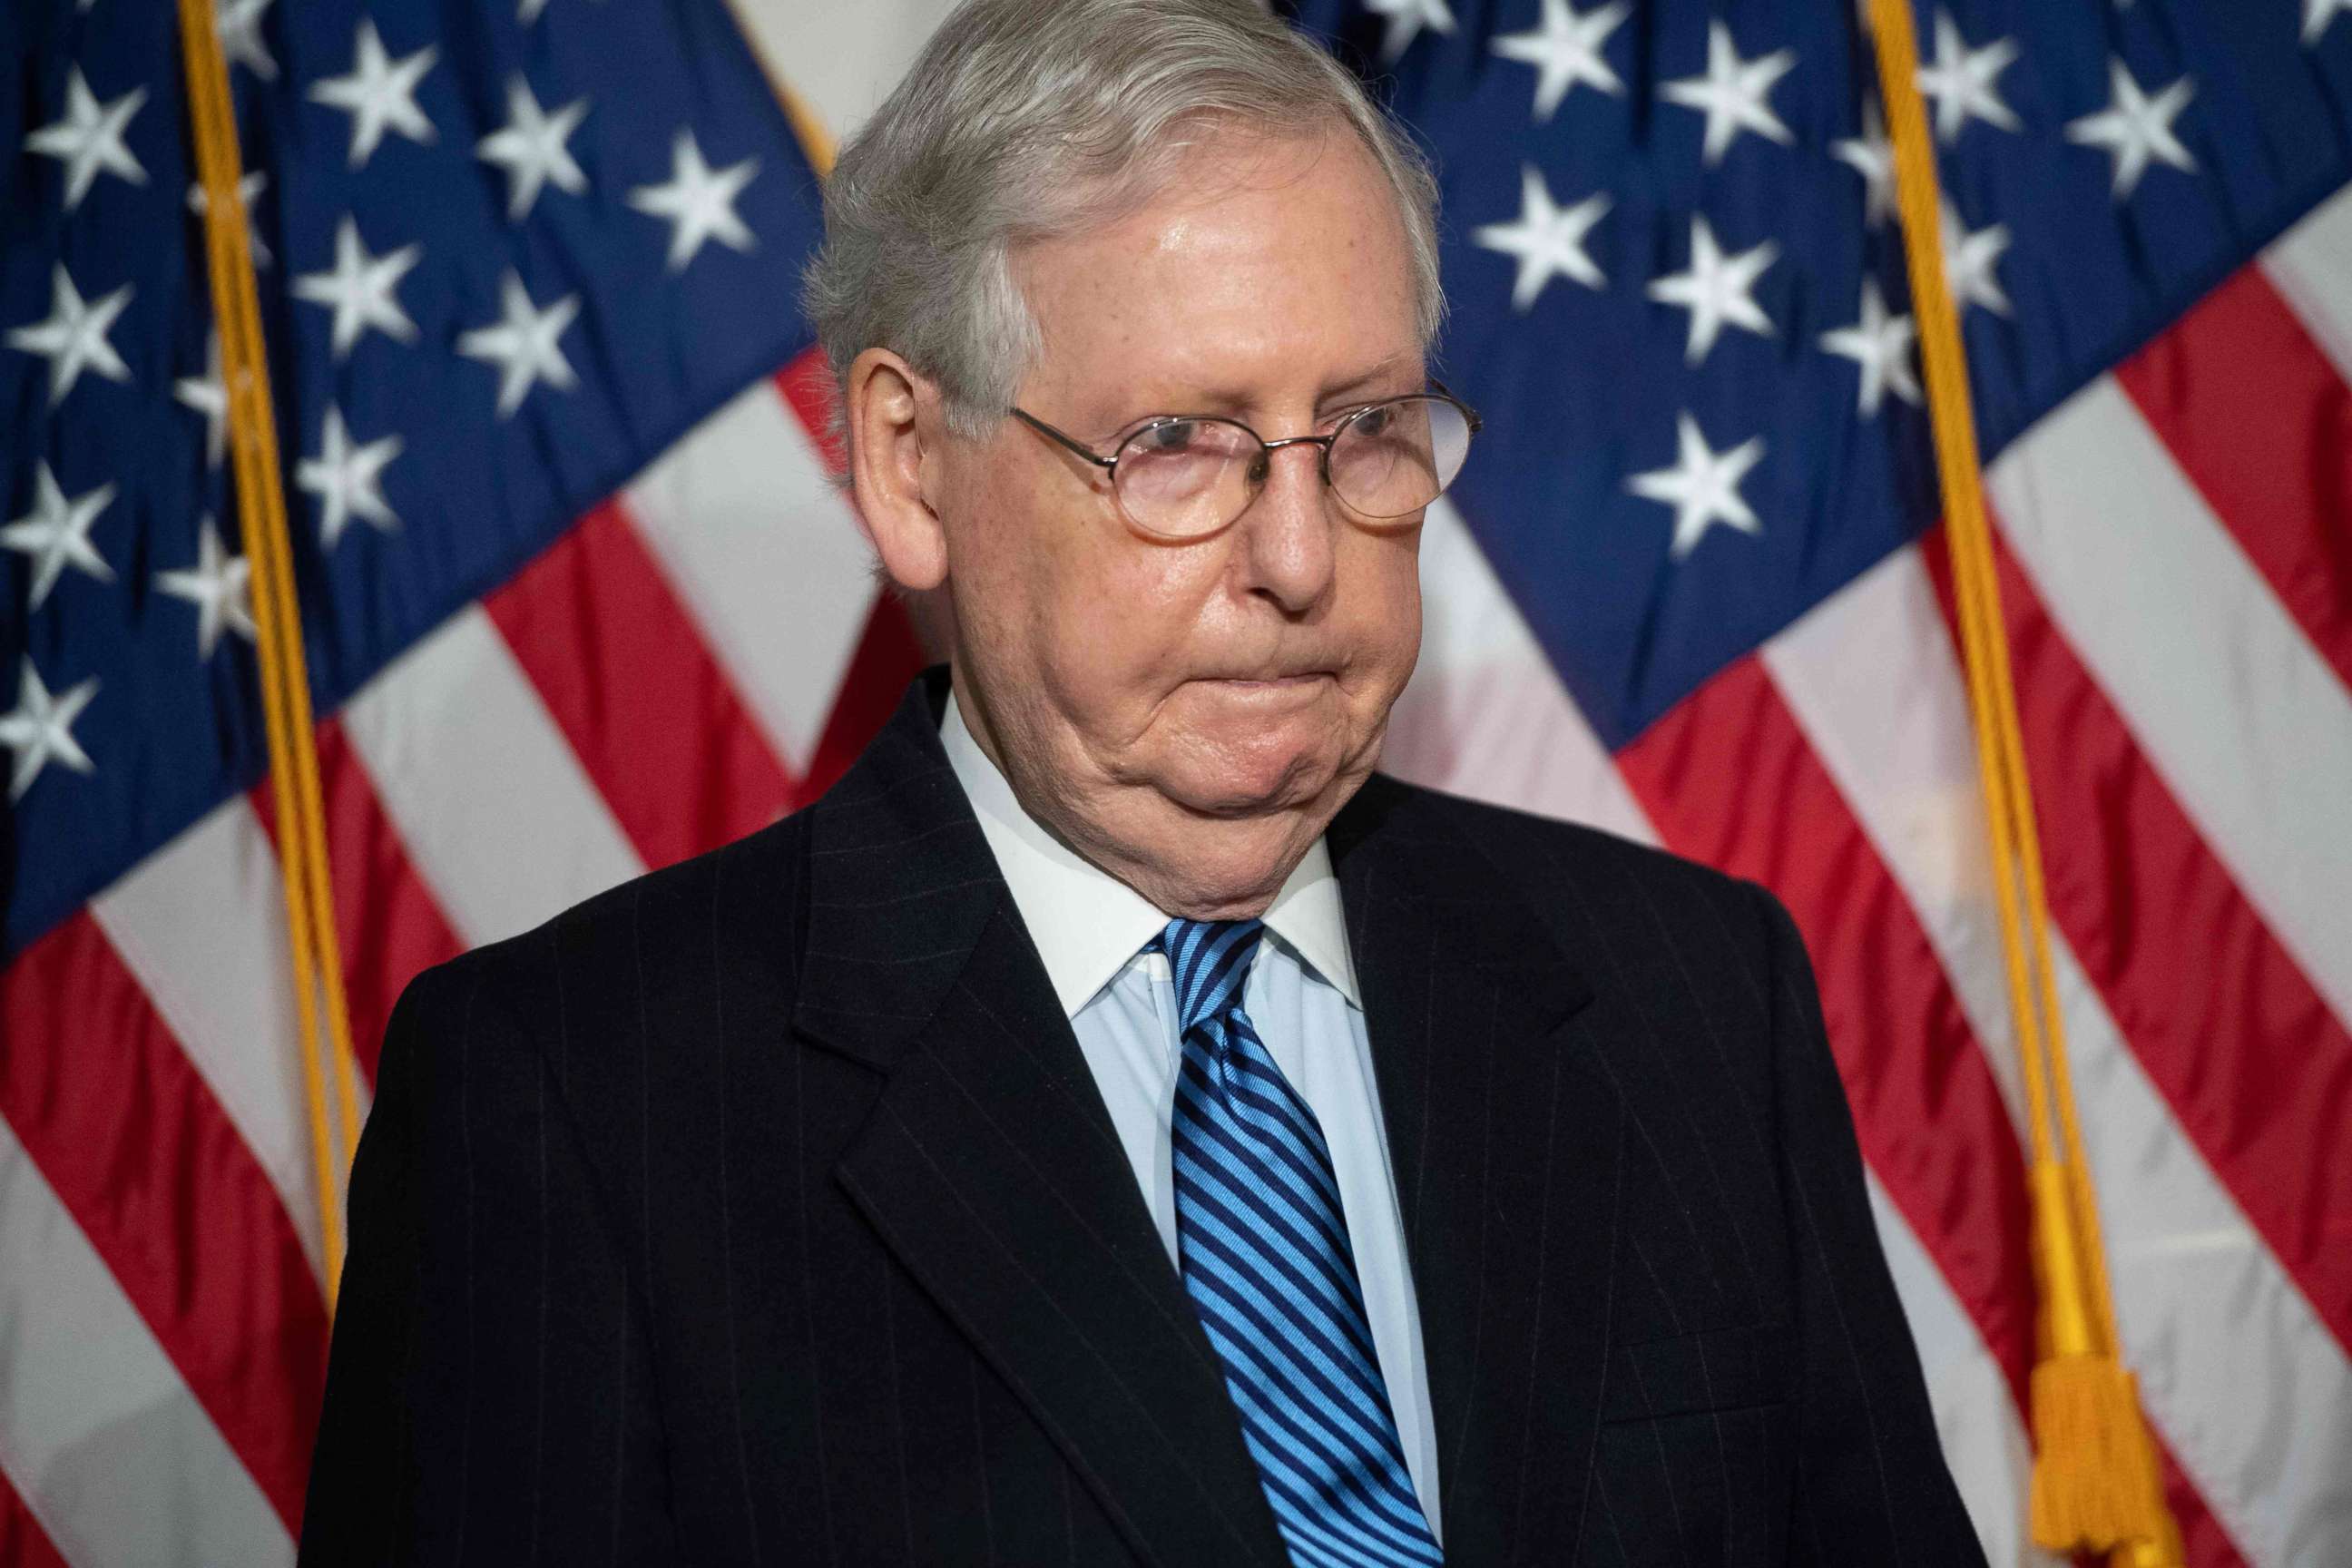 PHOTO: Senate Majority Leader Mitch McConnell speaks to the media on Capitol Hill in Washington, Nov. 10, 2020.